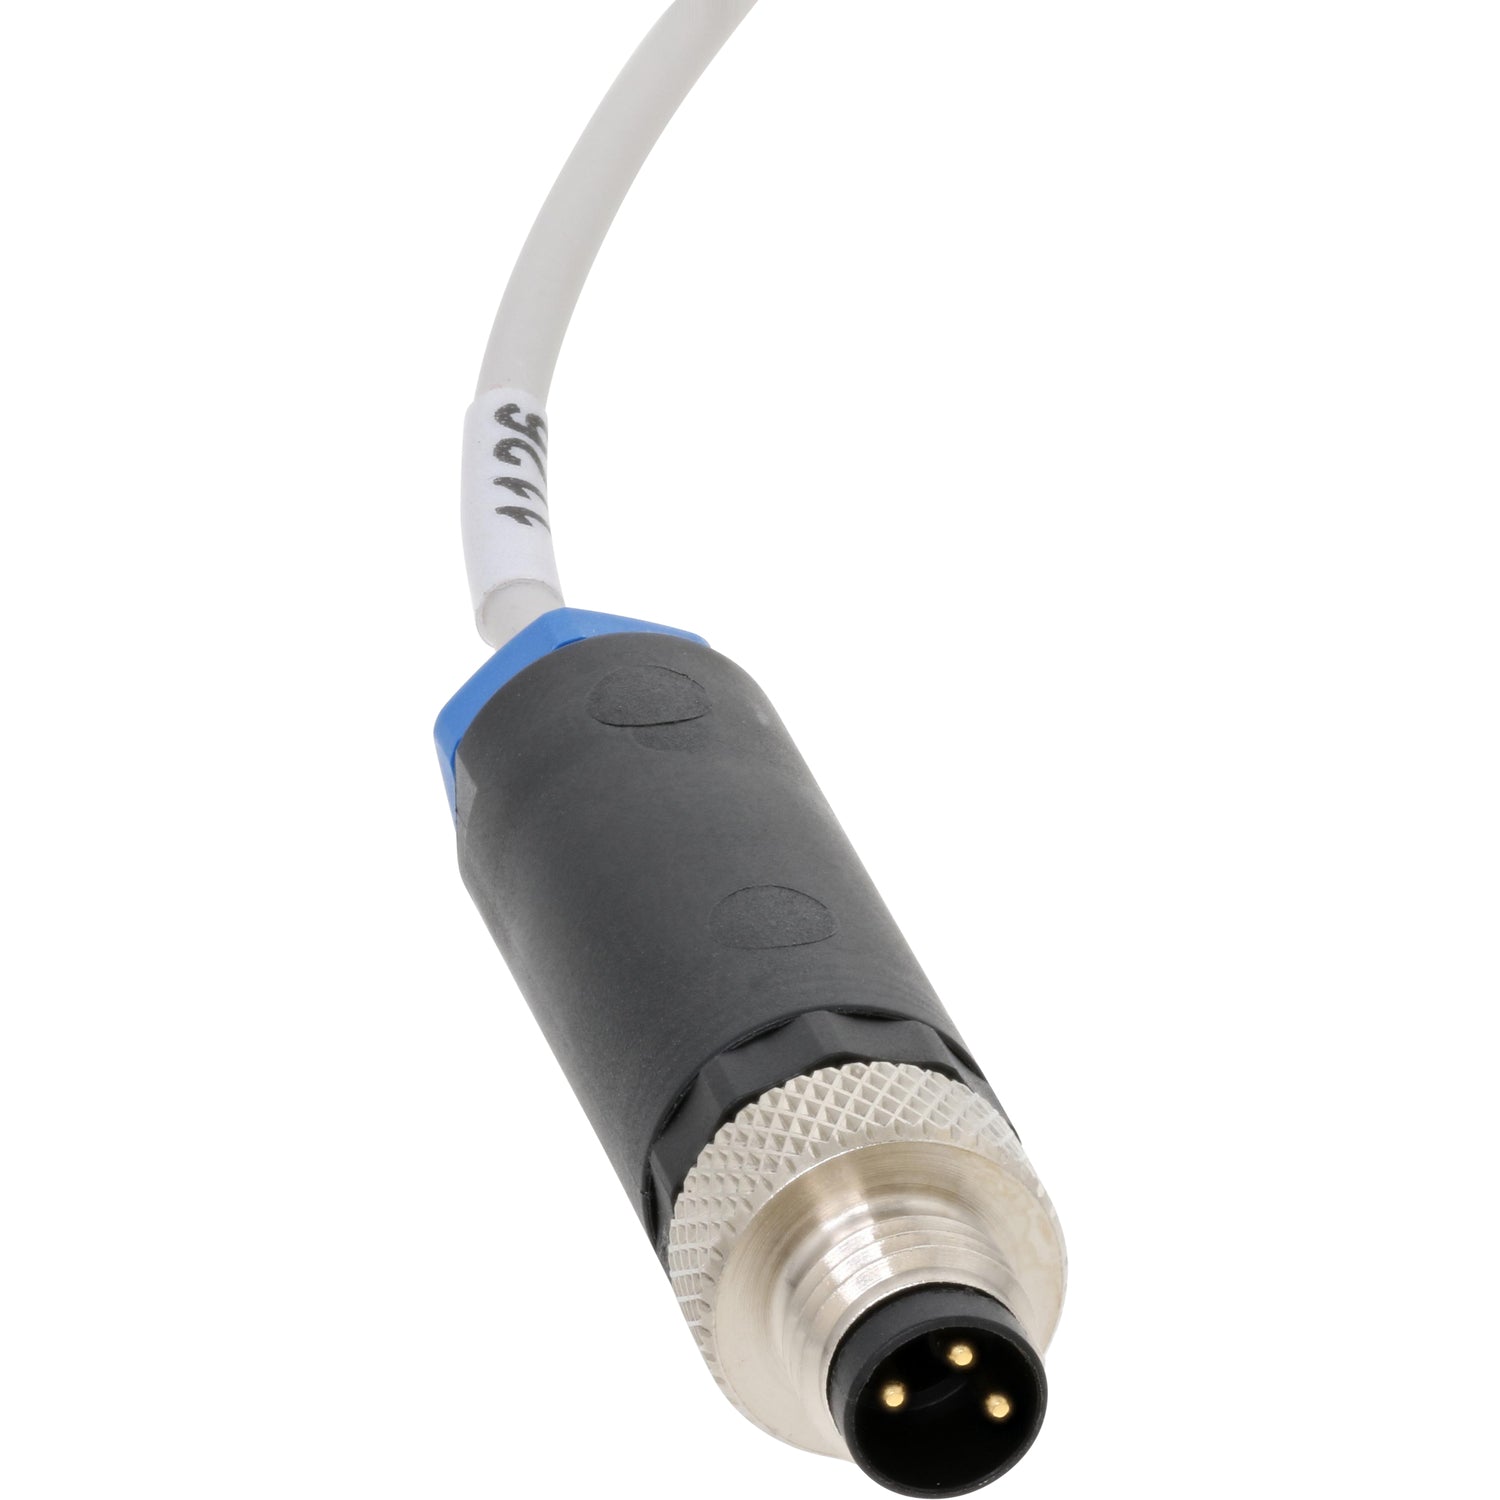 Light grey sensor cable with blue and black quick connect with stainless steel knurled tightening ring shown on white background. 